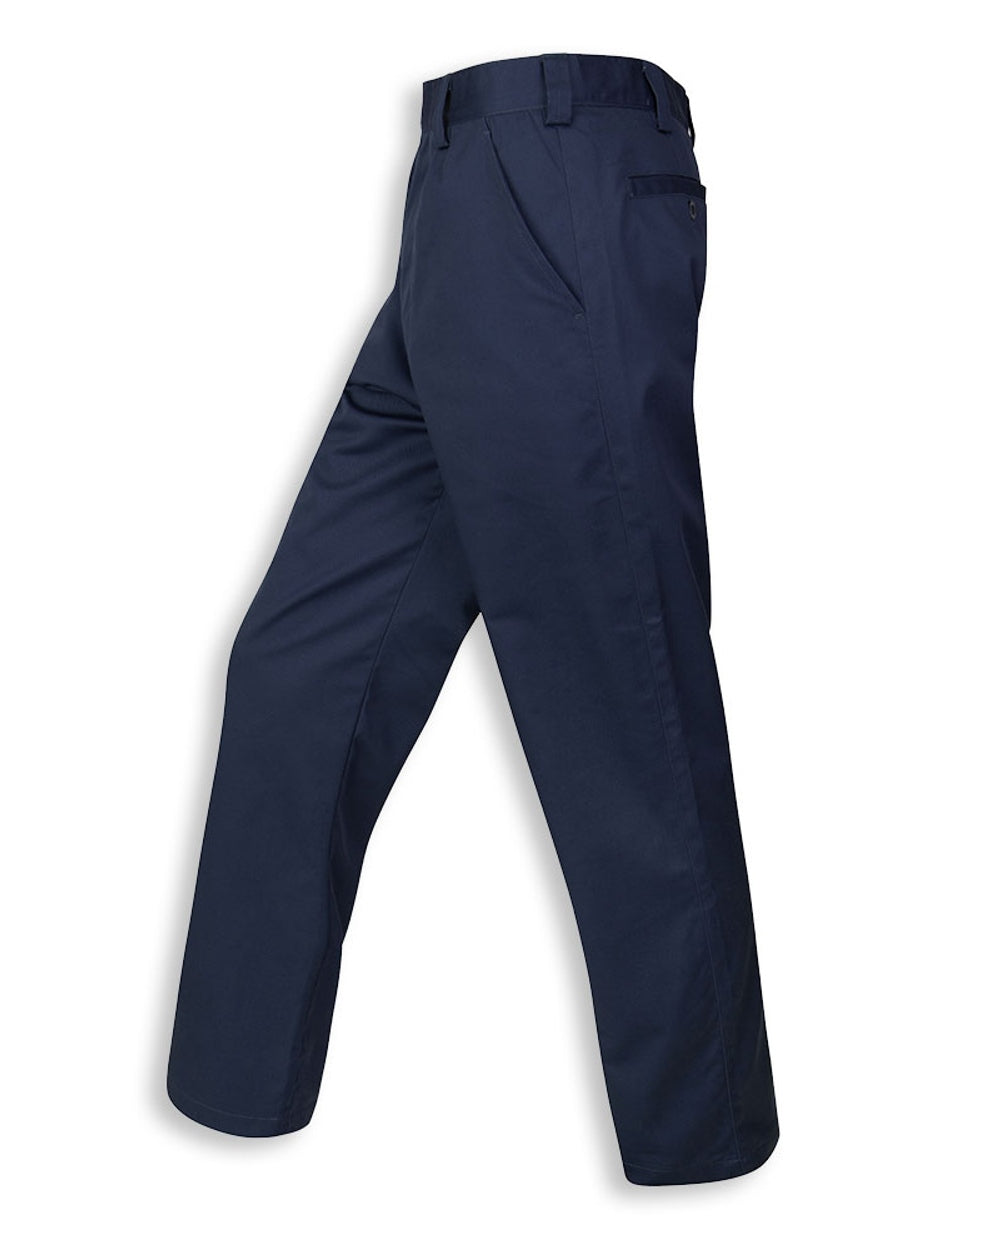 Work trousers Hoggs of Fife Bushwhacker Thermal Stretch Trousers in Navy 